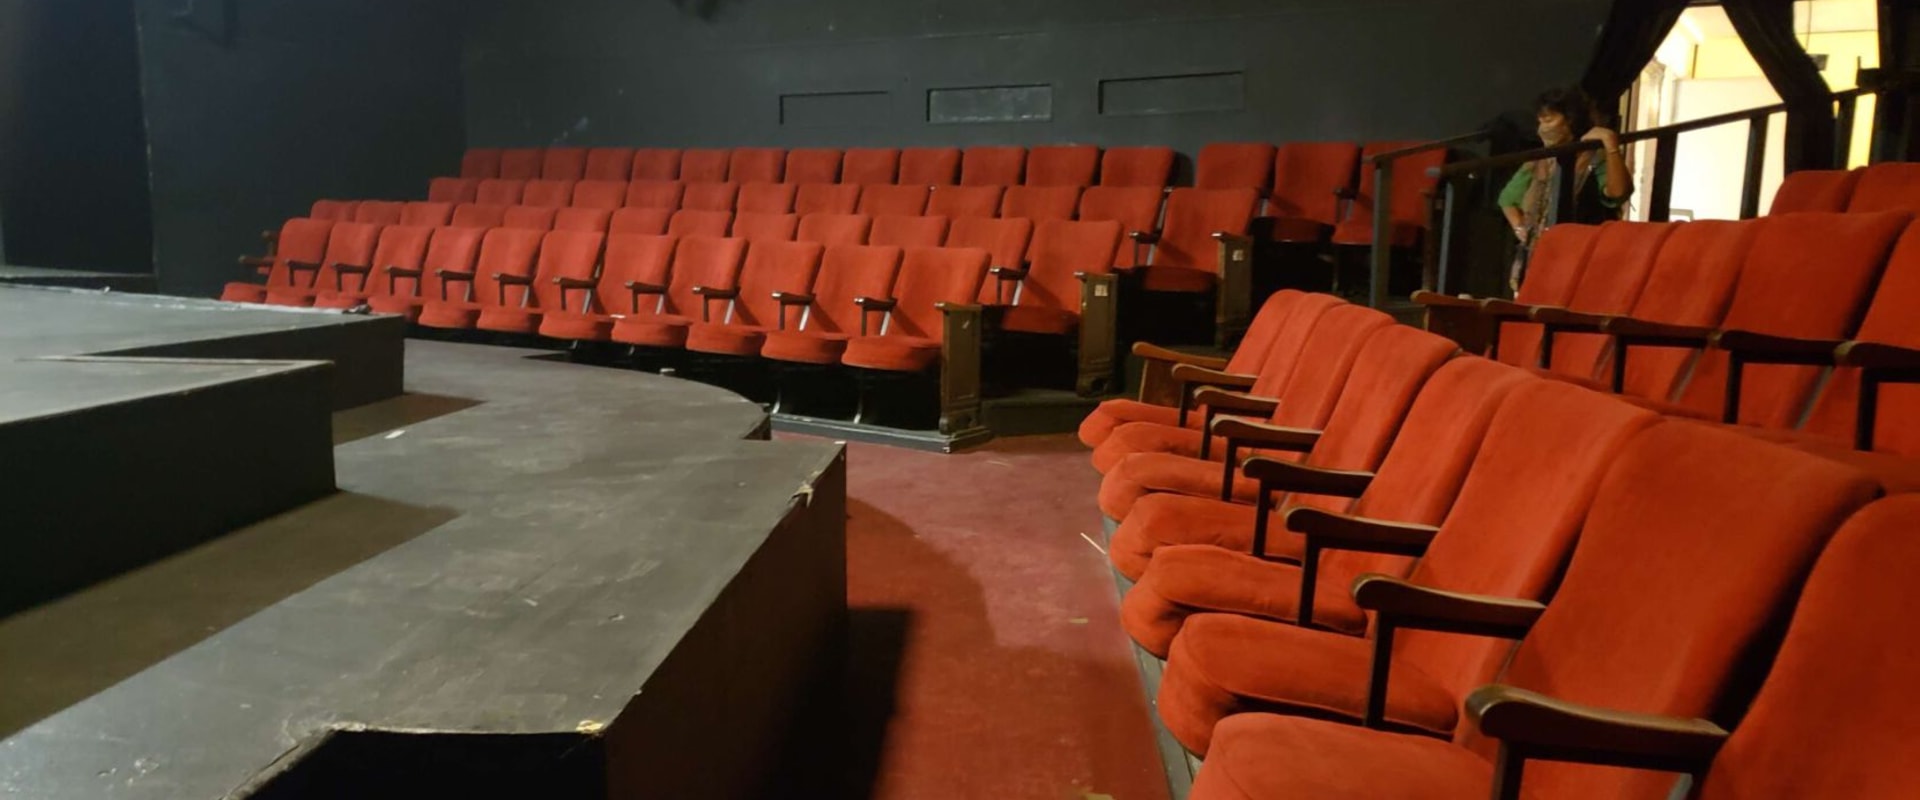 Theatres in South Jordan, UT: Making Entertainment Accessible for All